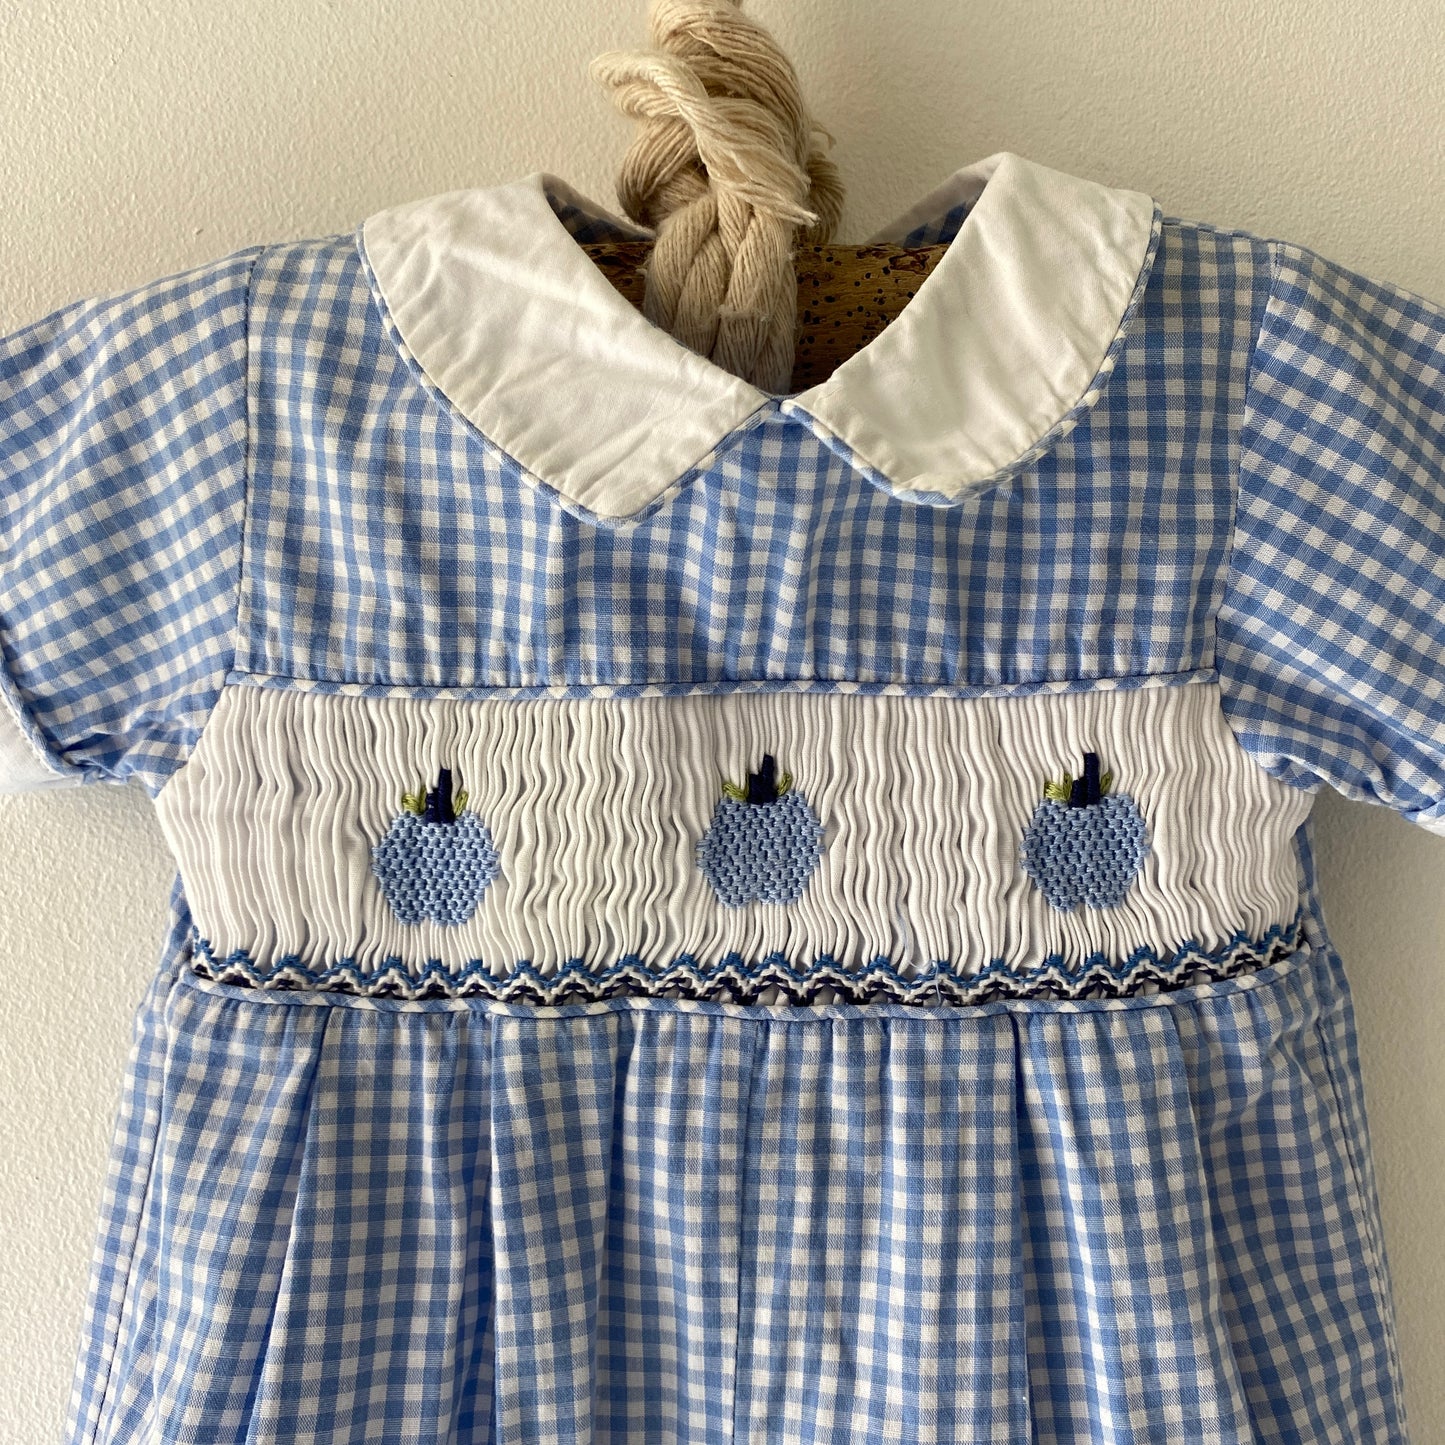 Blue Gingham Hand Embroidered Apple Romper (3/6M)